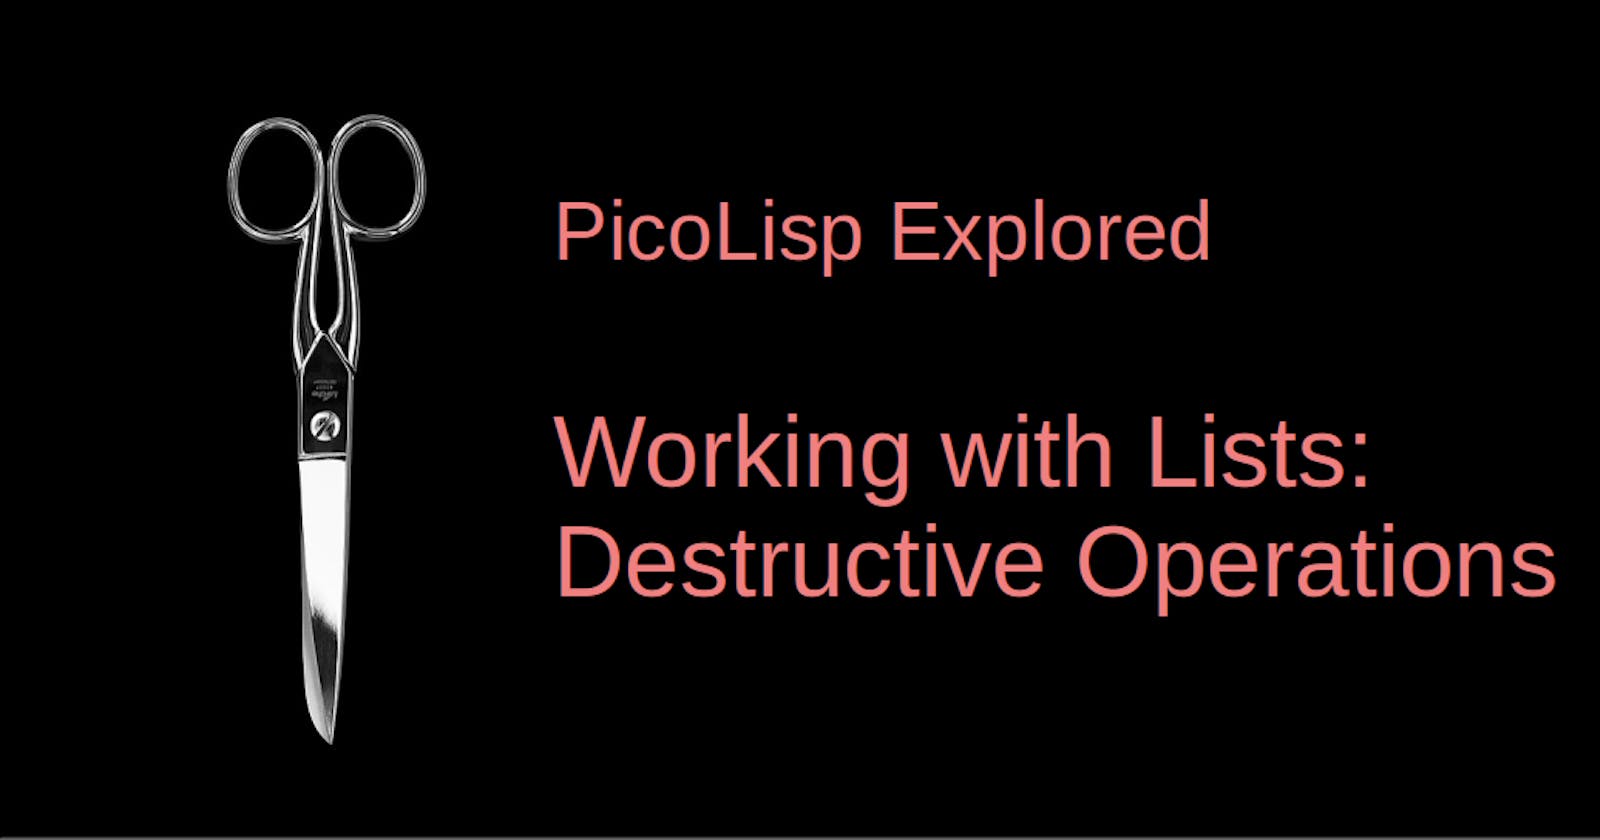 Working with Lists: Destructive Operations